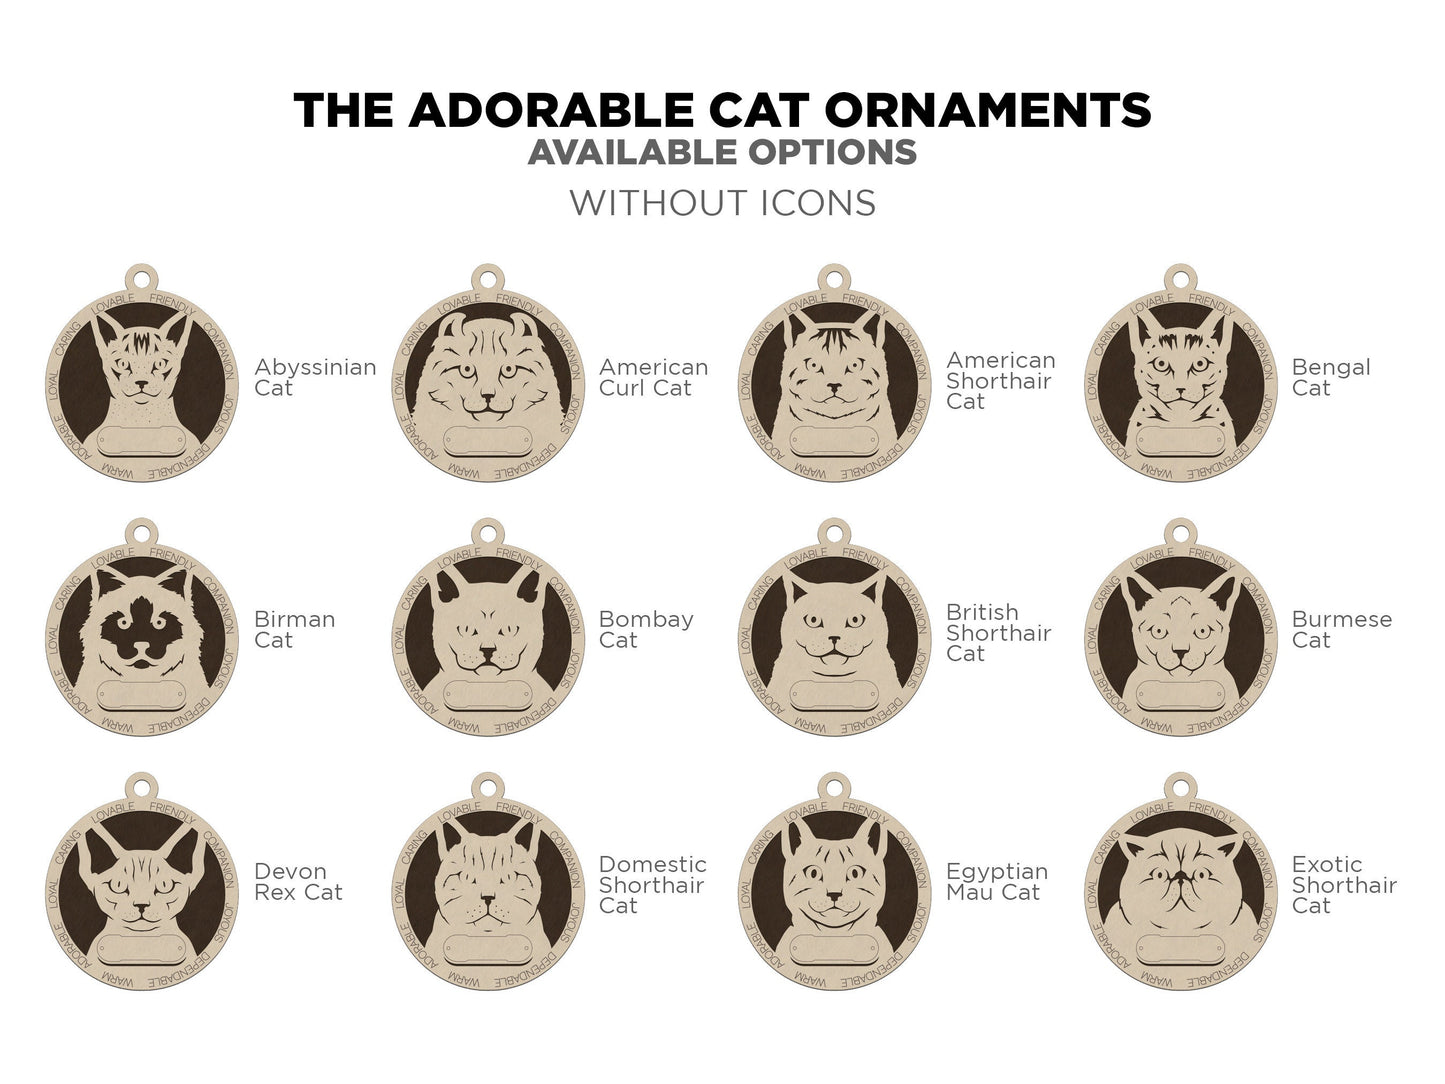 Adorable Cat Ornaments - 25 Breeds included with 2 Versions - 50 Ornaments - SVG, PDF, AI File Download - Sized for Glowforge